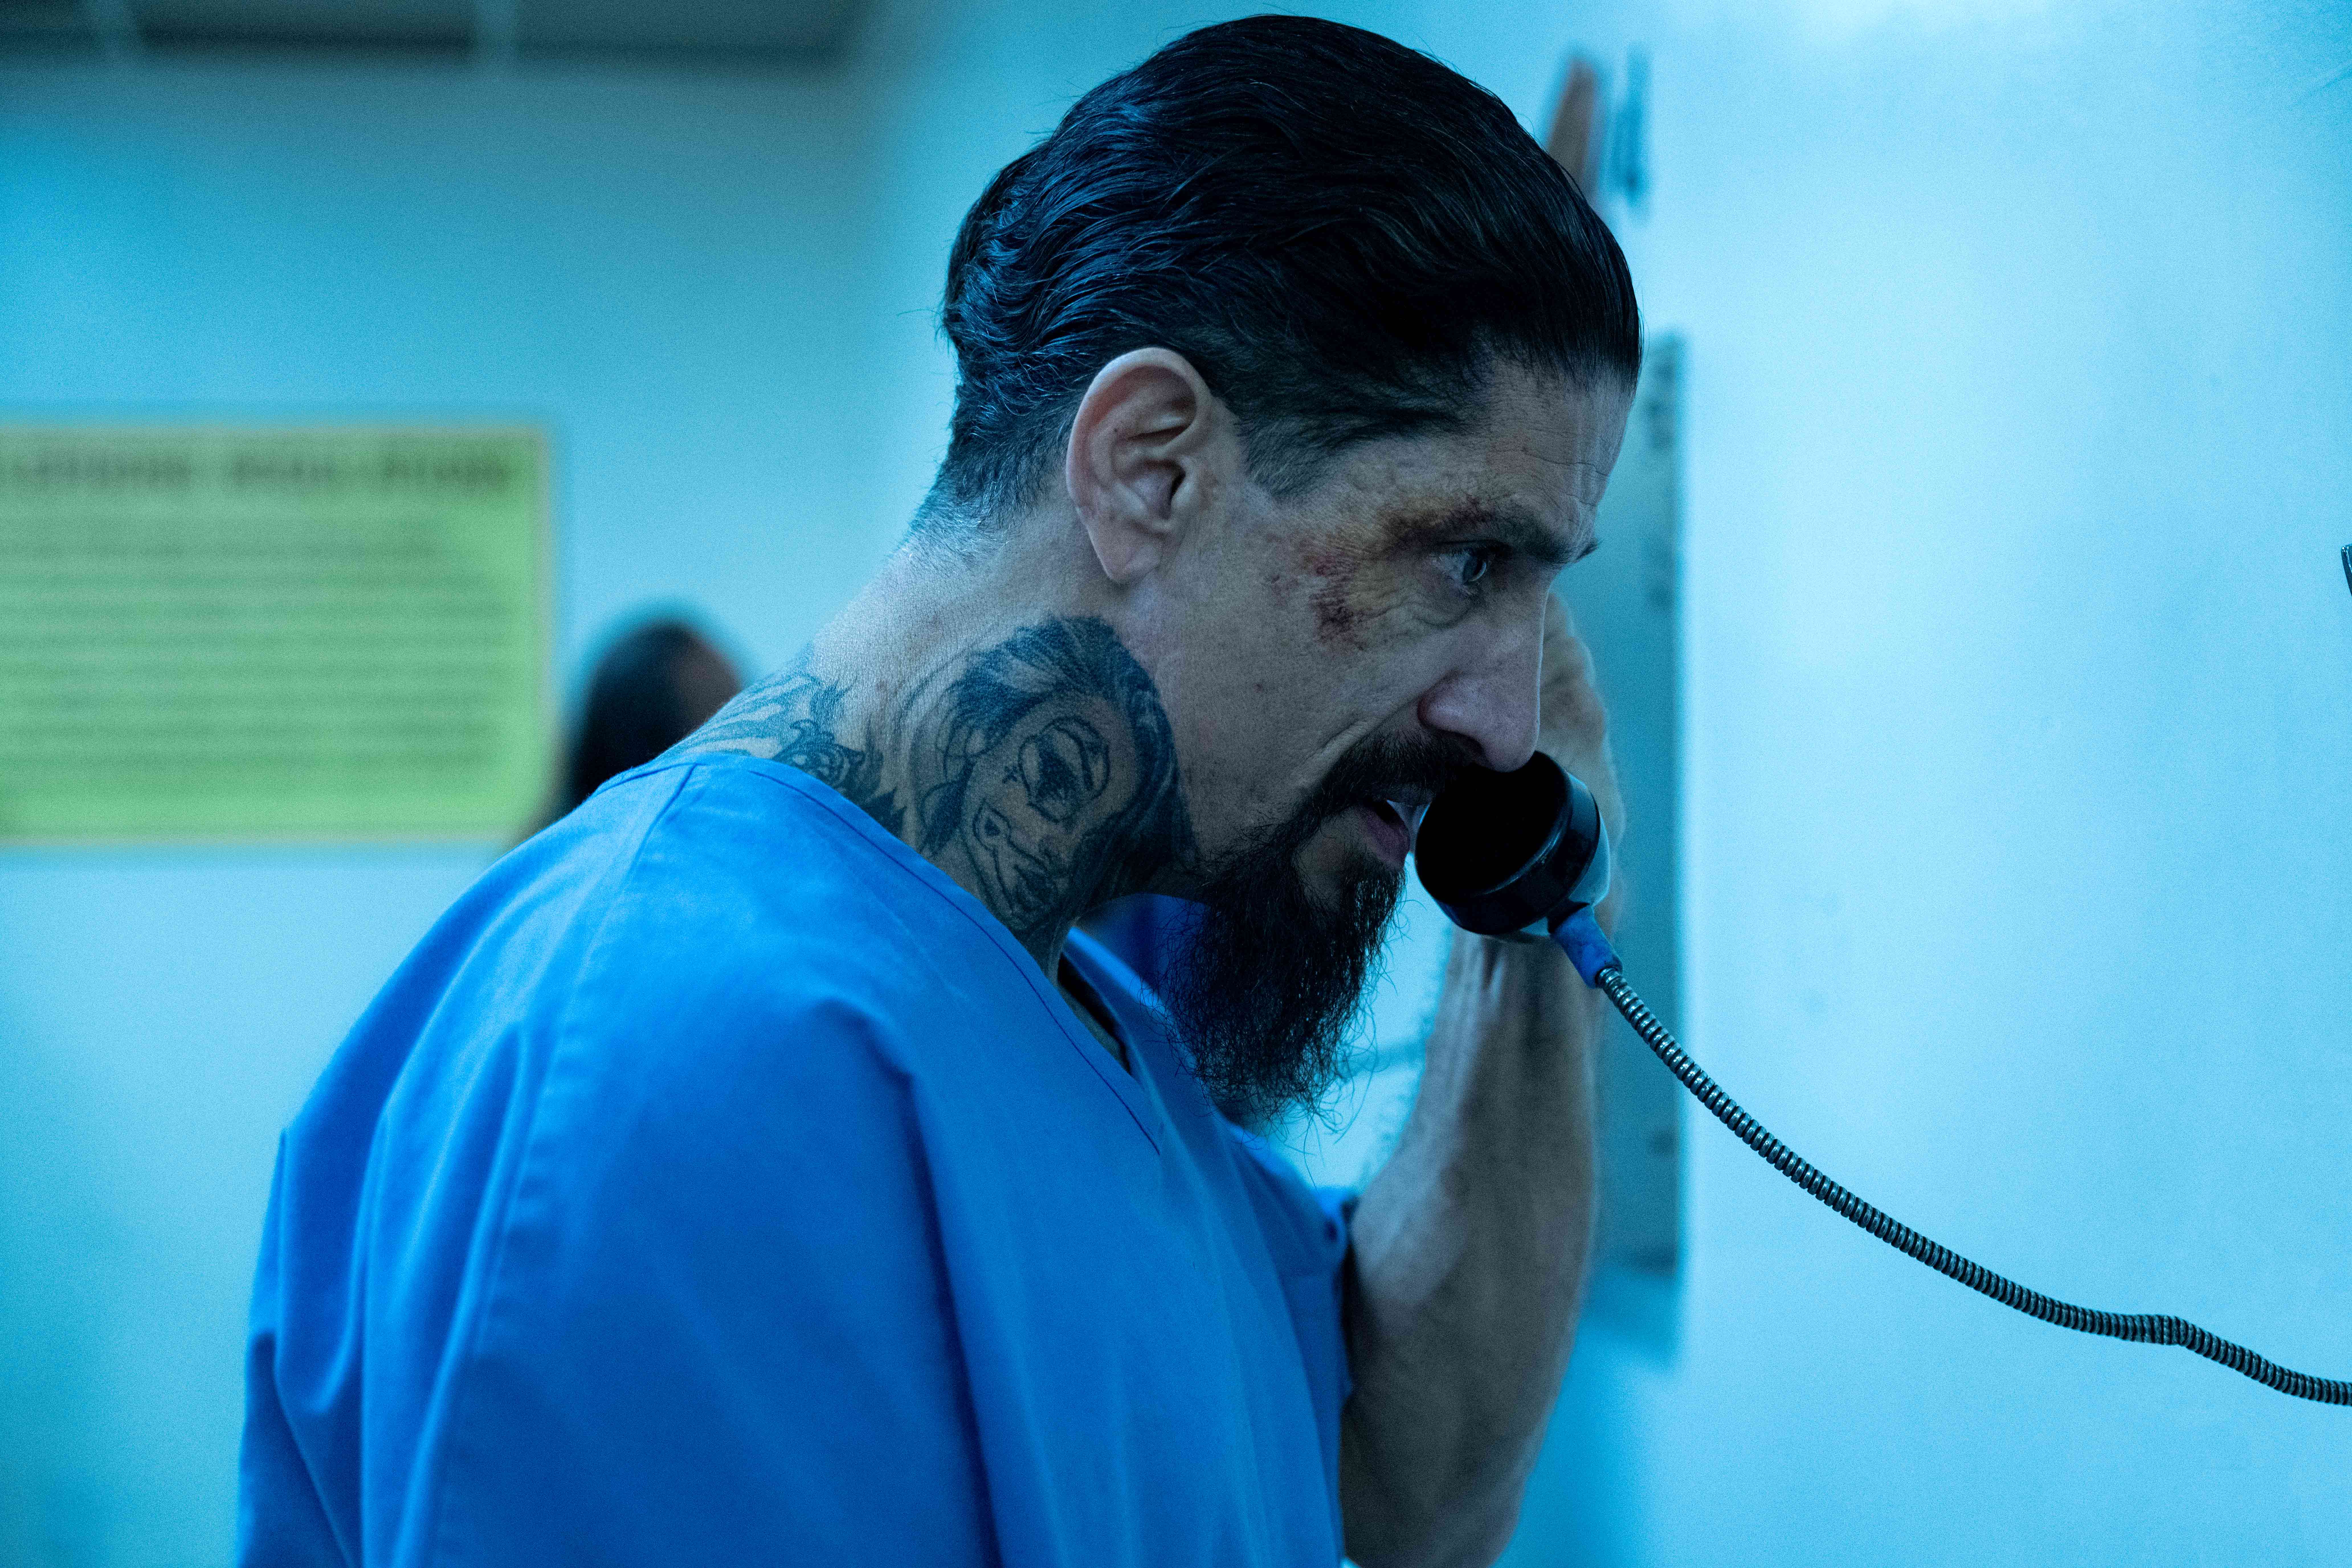 Joseph Lucero On Creeper’s Journey In Mayans M.C. And Where He Draws From For The Character | Exclusive